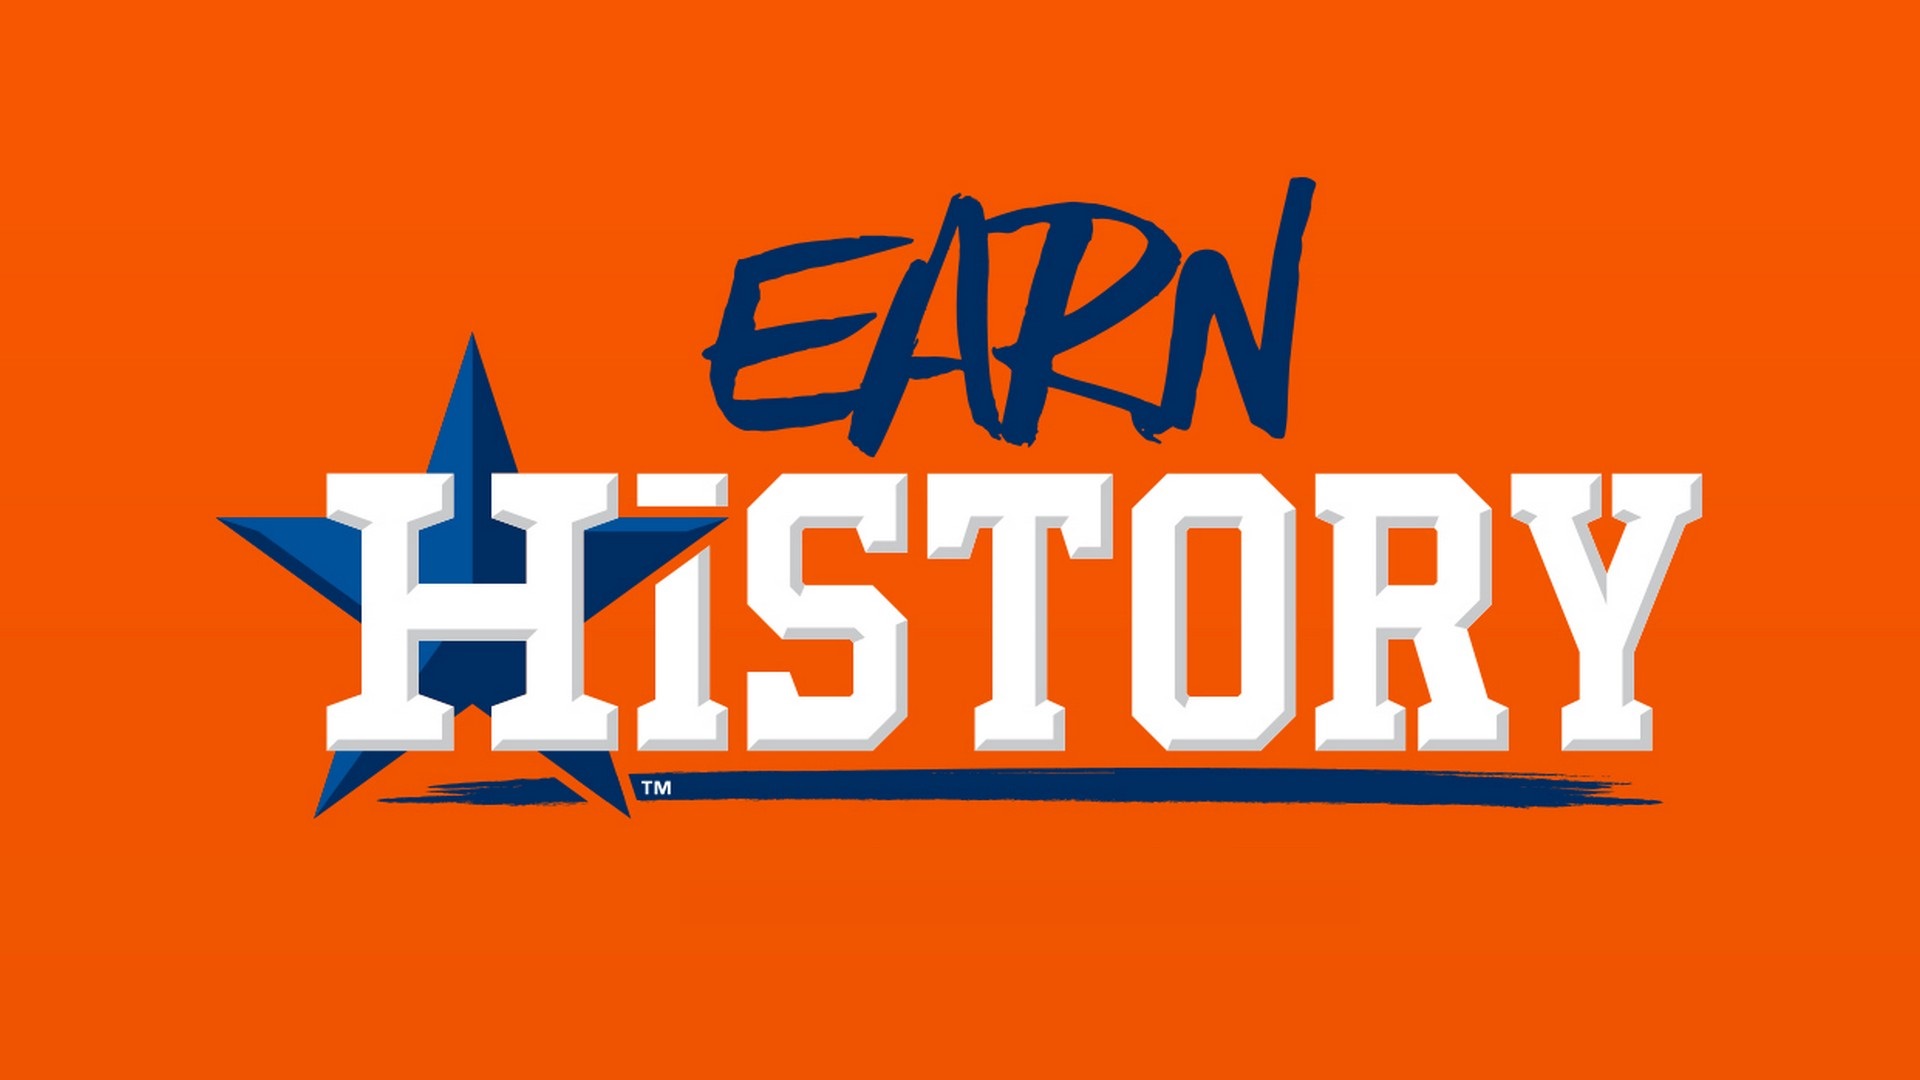 Wallpapers HD Houston Astros MLB With high-resolution 1920X1080 pixel. You can use this wallpaper for Mac Desktop Wallpaper, Laptop Screensavers, Android Wallpapers, Tablet or iPhone Home Screen and another mobile phone device